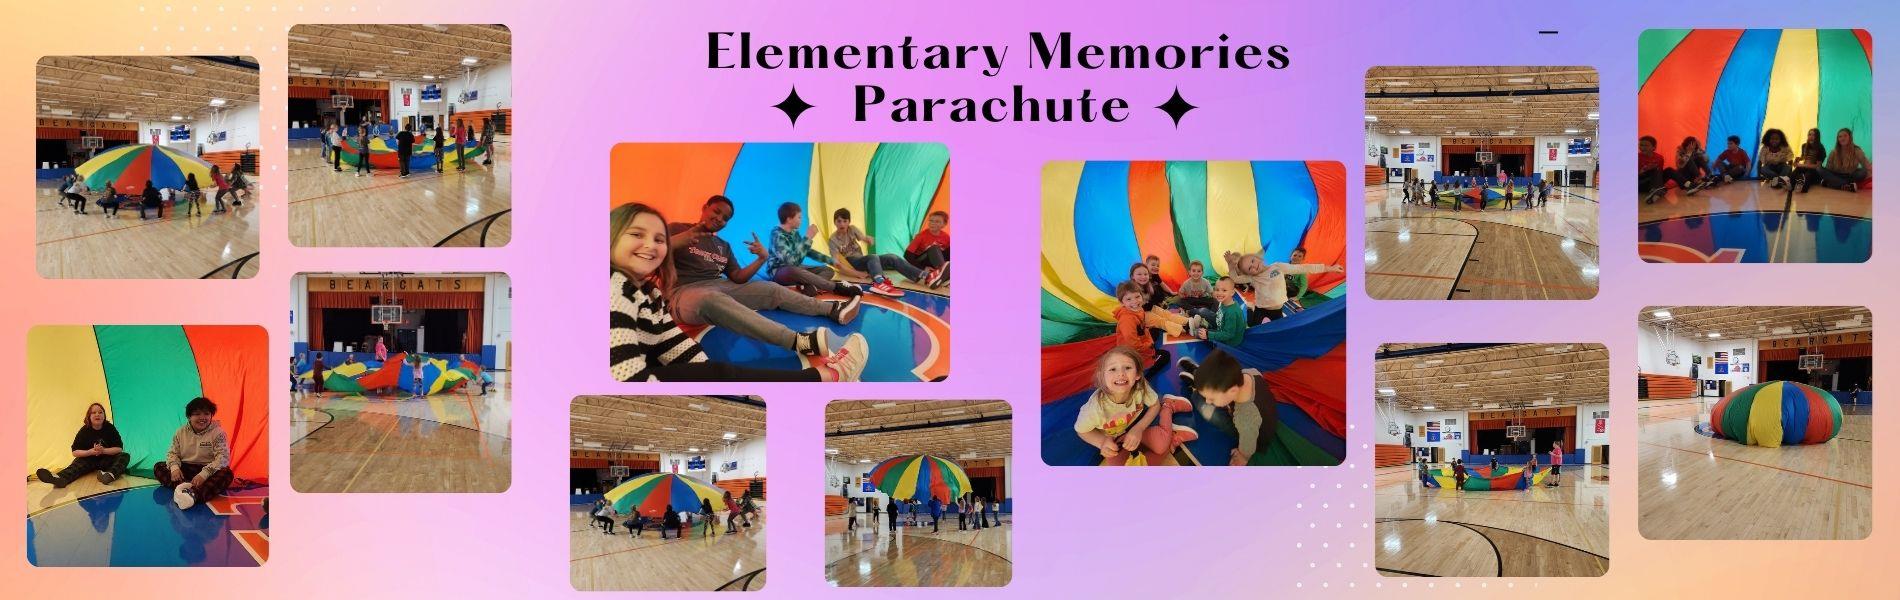 images of students with parachute in physical education class